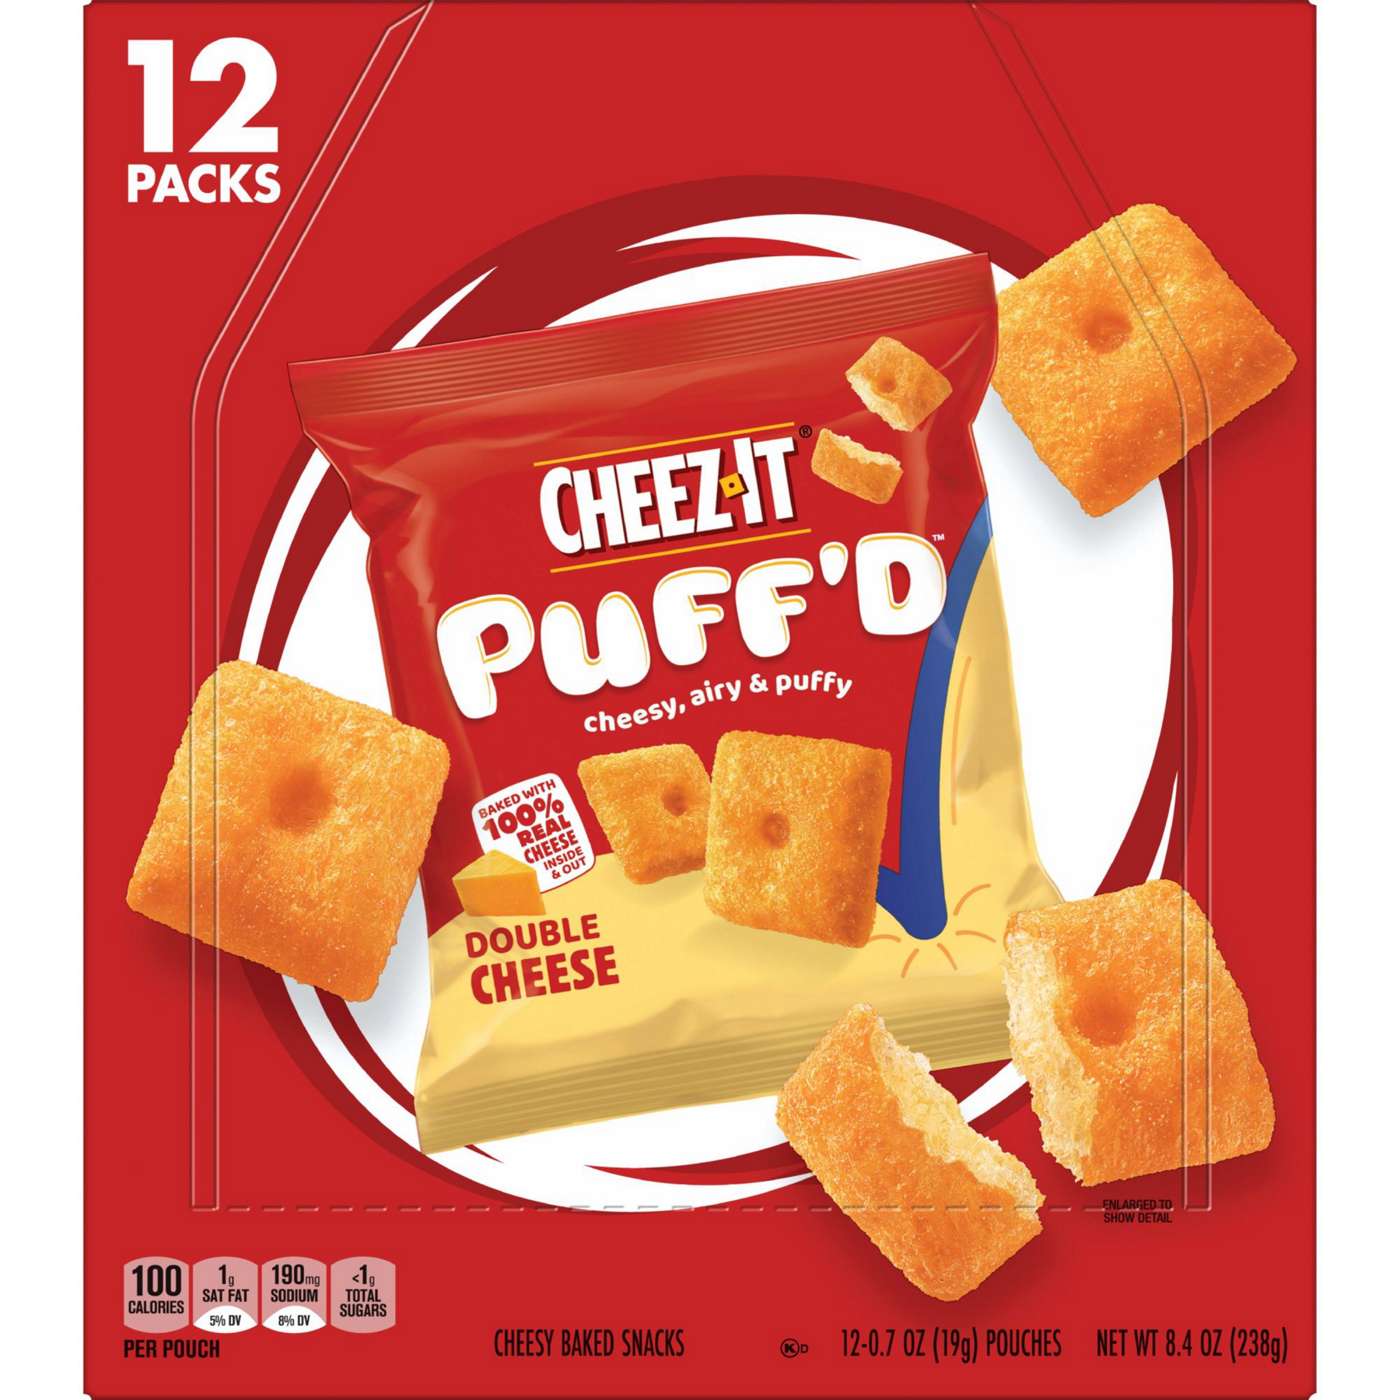 Cheez-It Puff'd Double Cheese Cheesy Baked Snacks; image 1 of 5